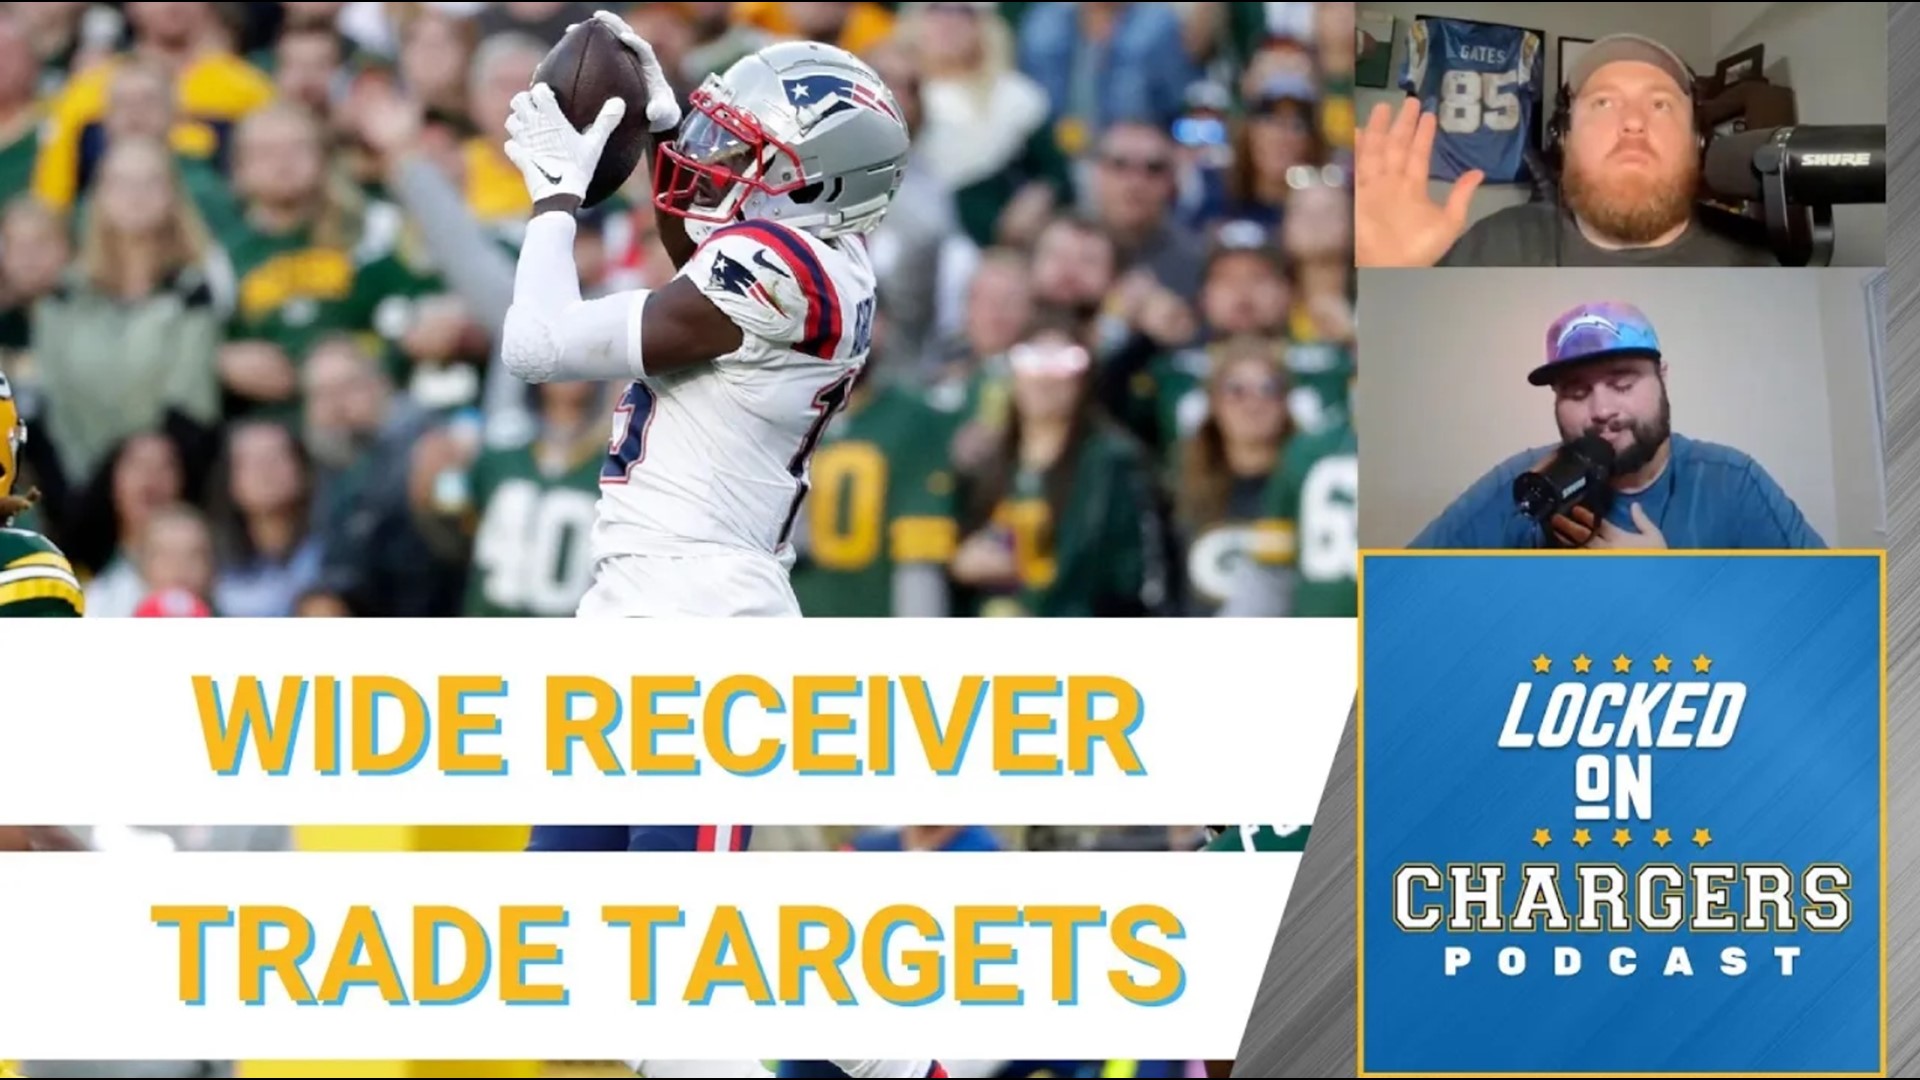 The guys discuss trade options like Nelson Agholor and long shots like Elijah Moore. With Keenan Allen & Mike Williams both injured, the receiver room needs a spark.